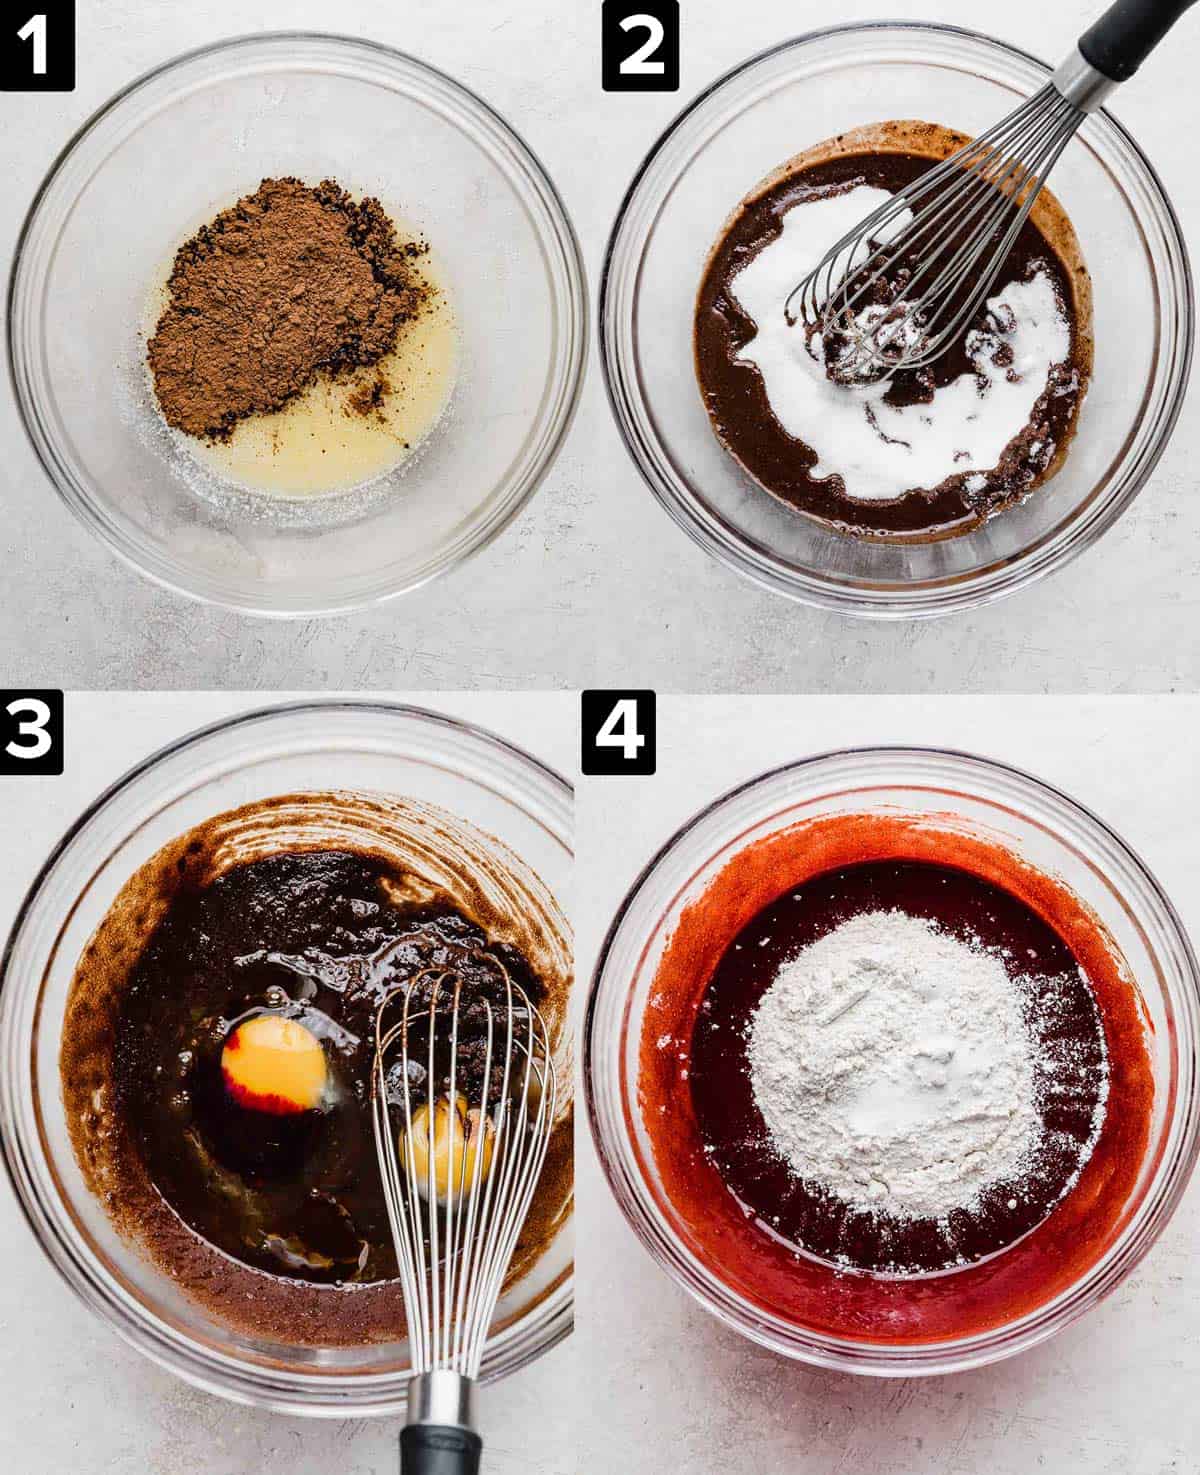 Four images showing how to make Red Velvet Brownie batter, adding cocoa powder, butter, eggs, and flour.